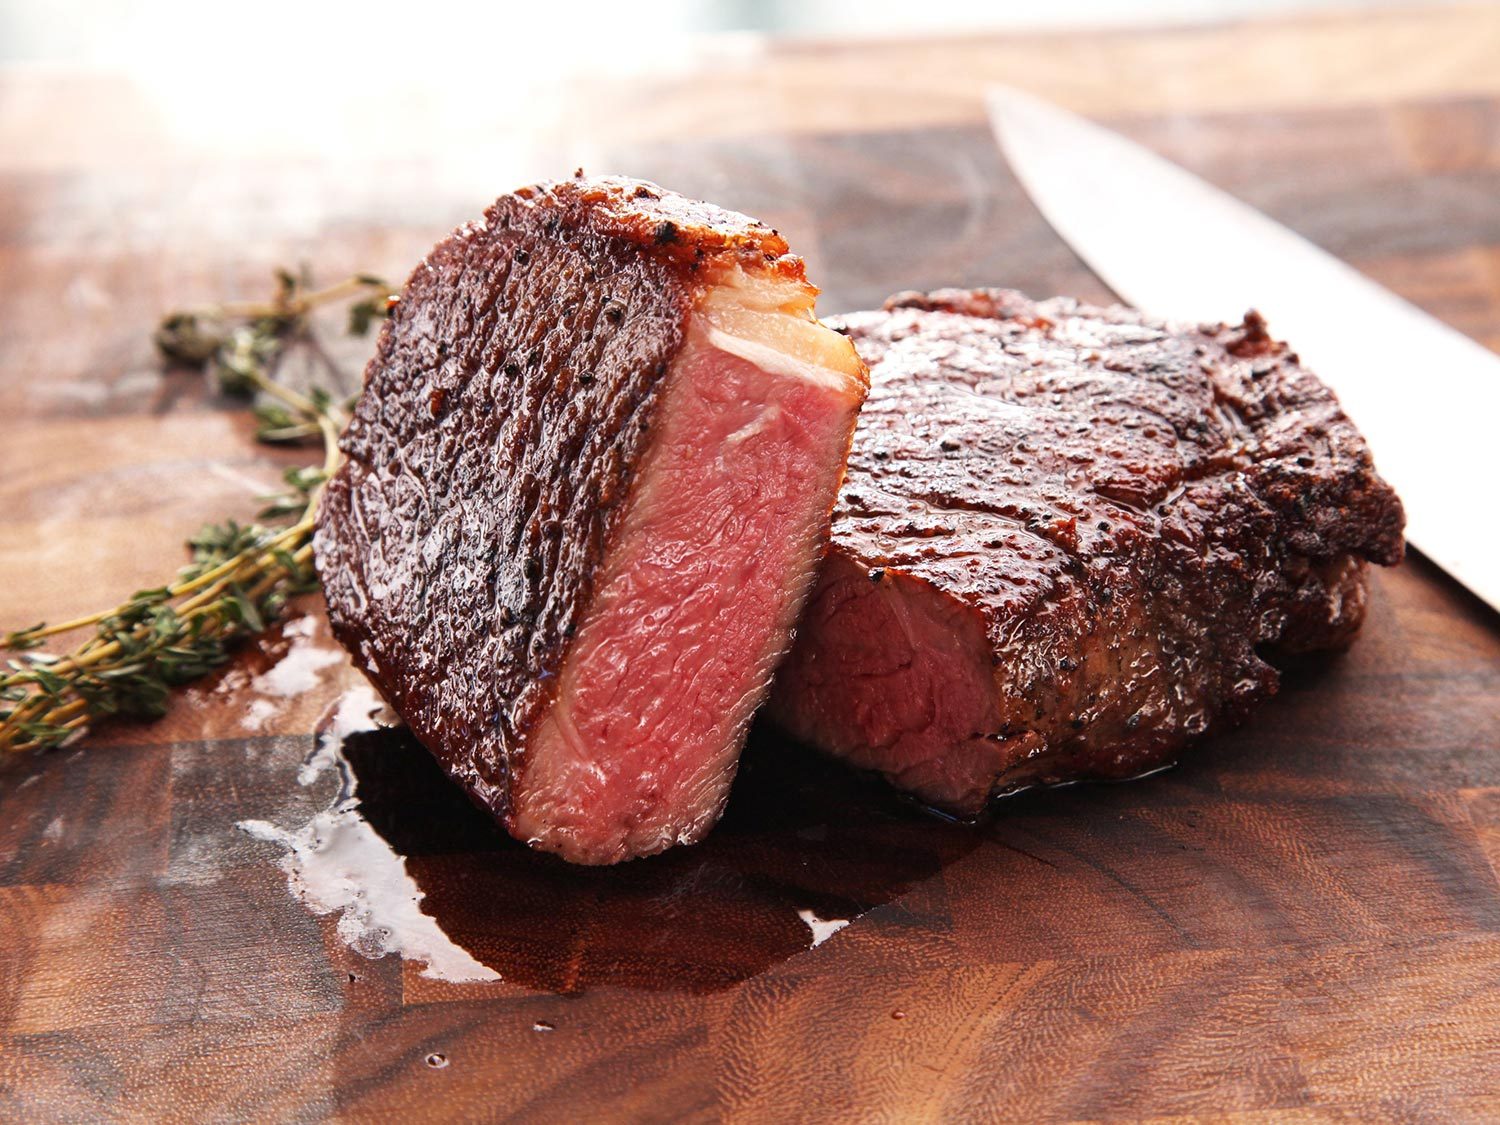 Rate These 15 Foods and We’ll Reveal If You’re More Shy or Outgoing Anova Steak Guide Sous Vide Photos15 beauty 1500x11251